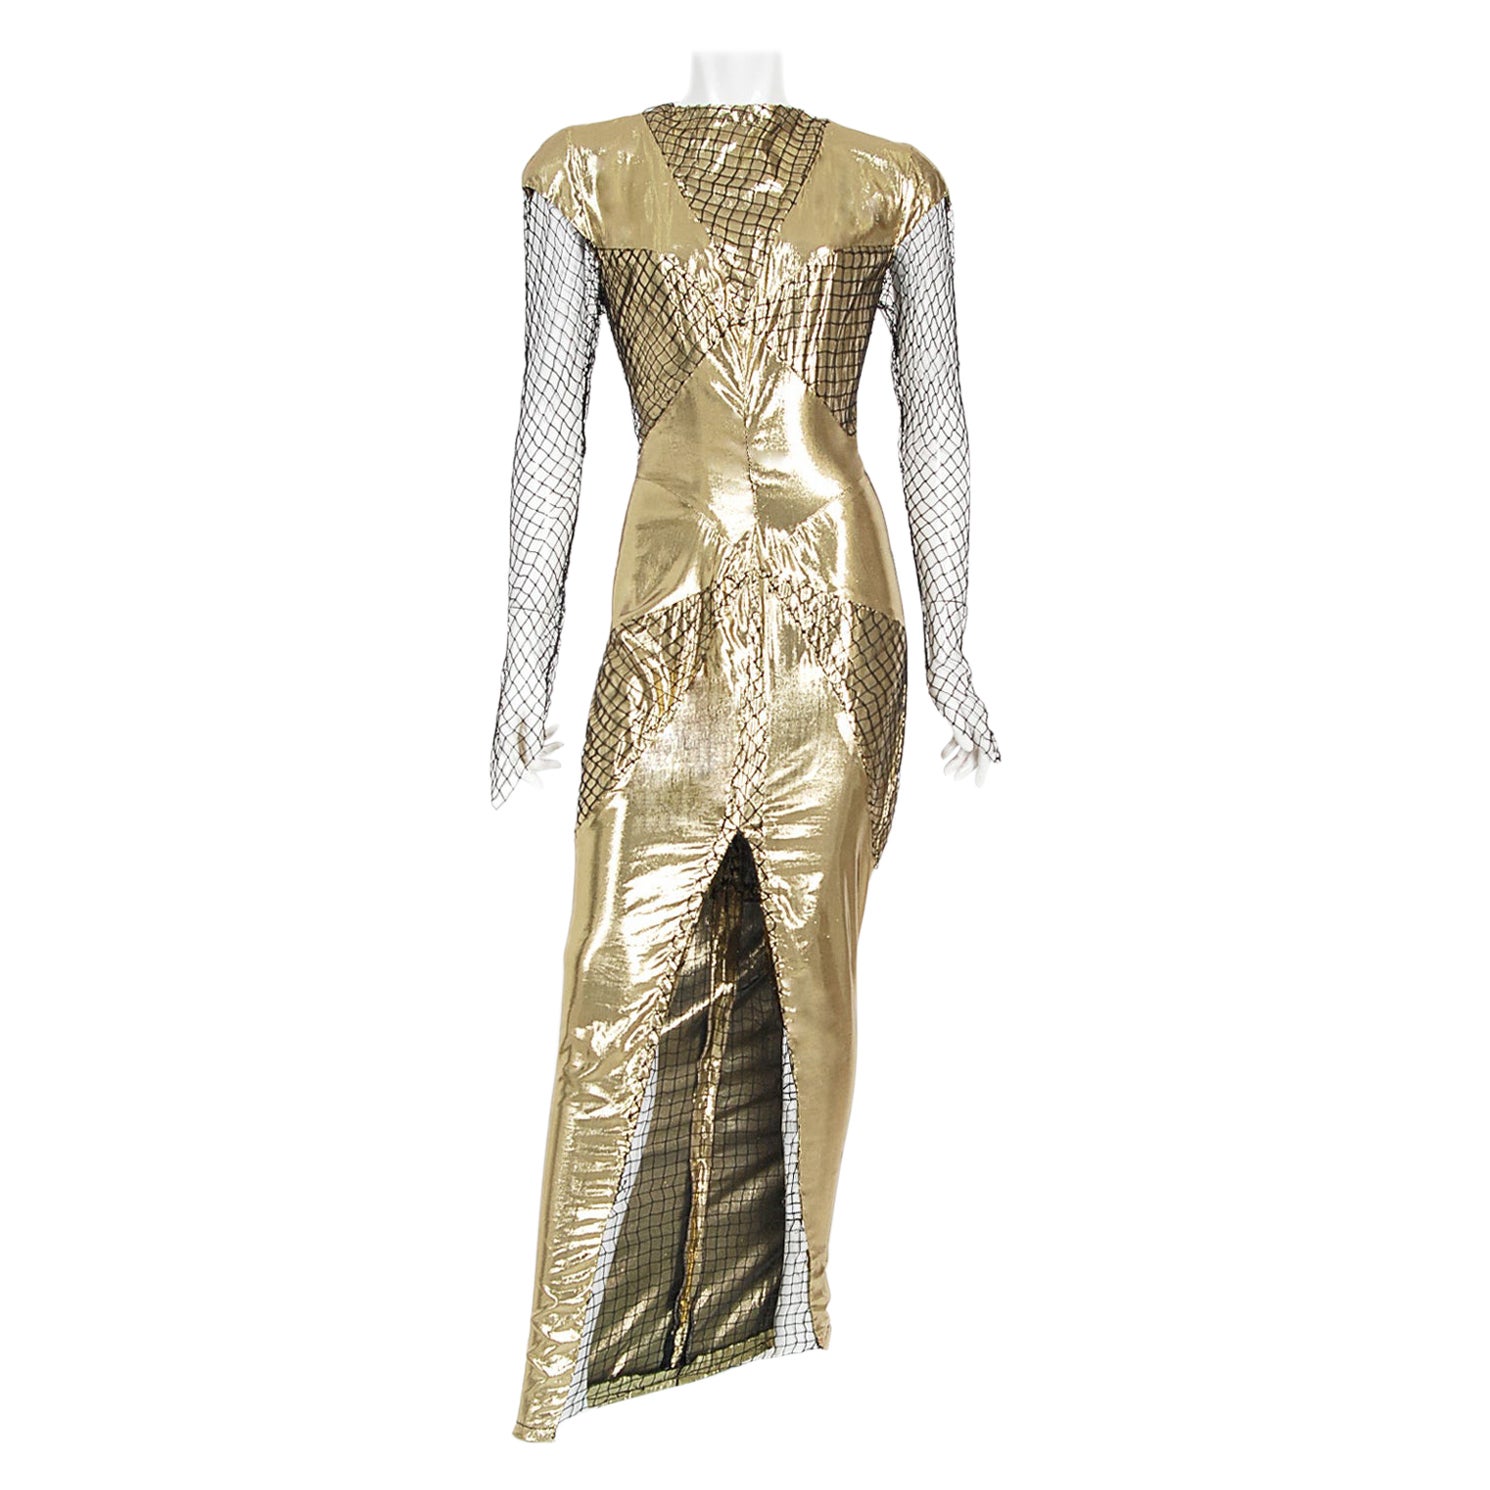 1985 Thierry Mugler Couture Documented Metallic Gold Lamé Fishnet High-Slit Gown For Sale